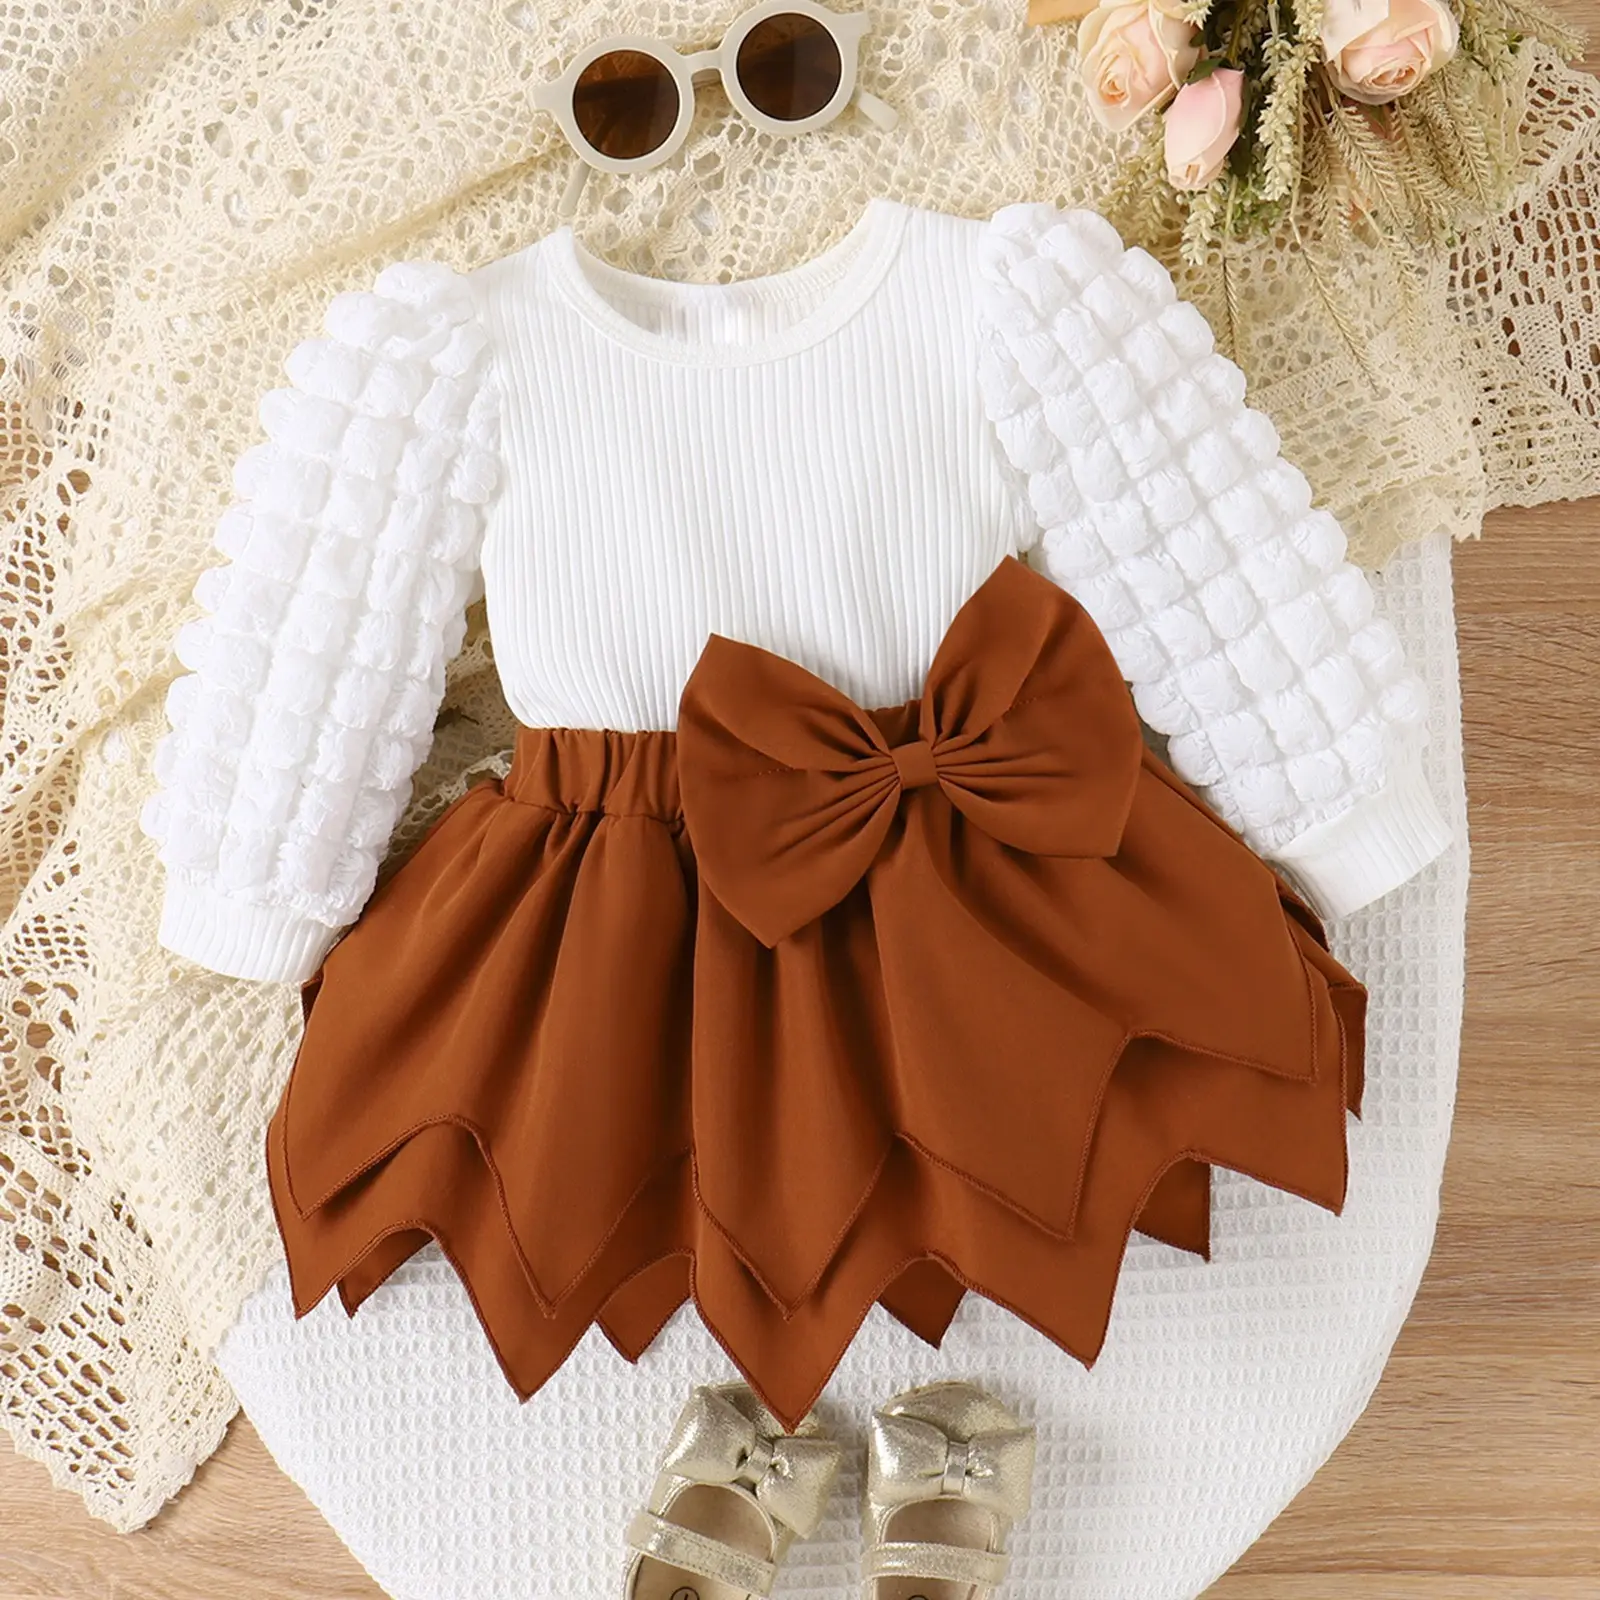 Sunny Baby Girls 0-2T Autumn And Winter Puffed Sleeve Top + Solid Color Bow Irregular Skirt 2 Pieces Set Baby Girl Set Clothes